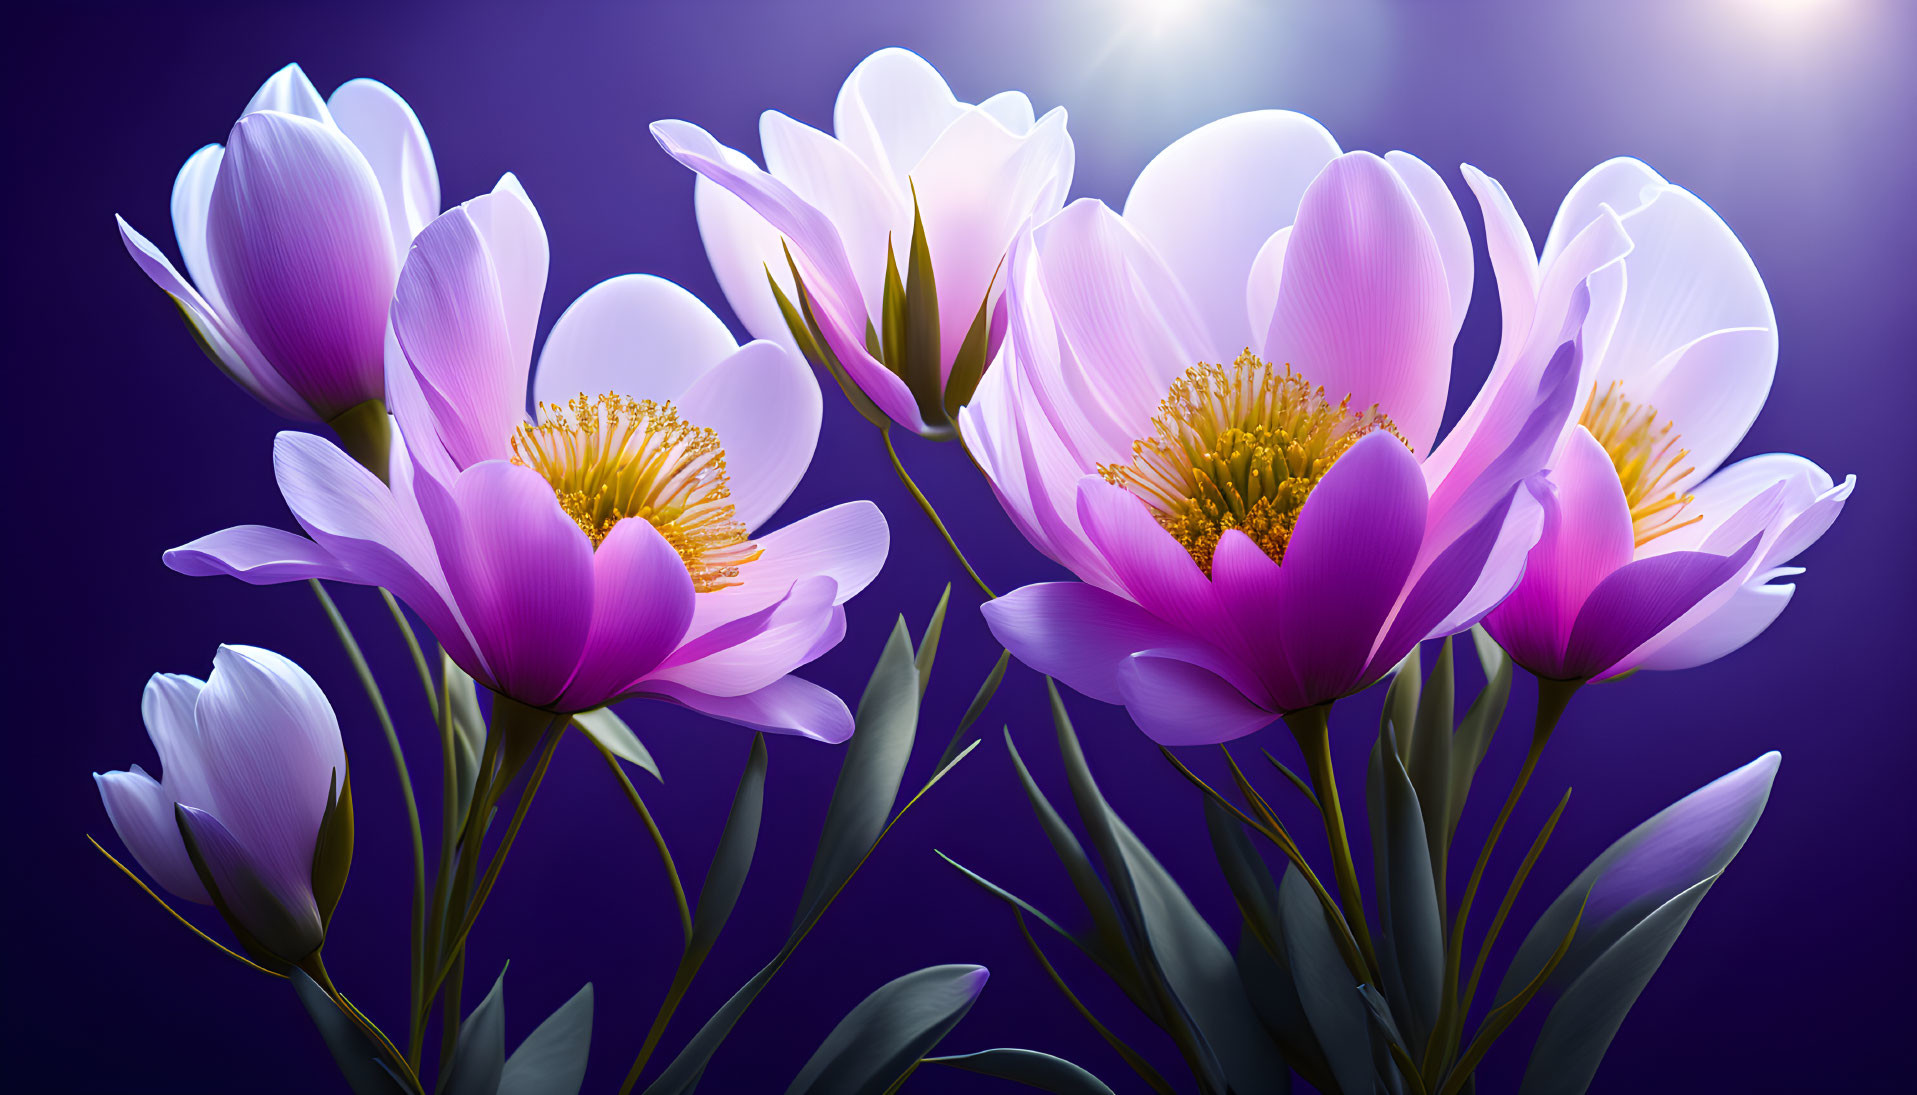 Vibrant pink and white flowers on moody purple background